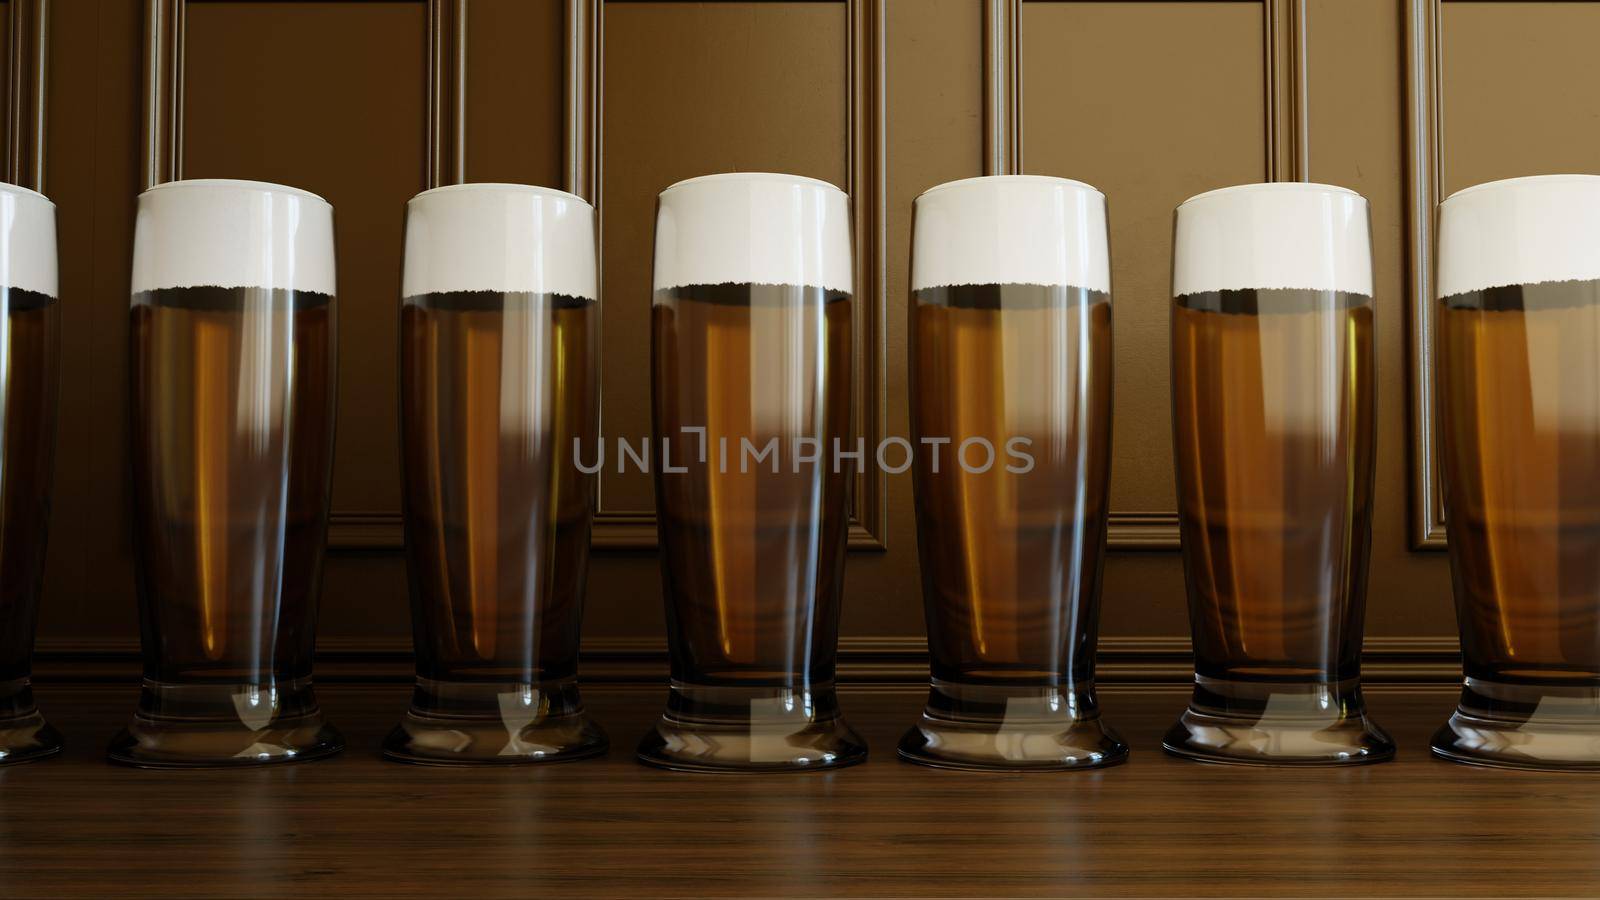 3D illustration Background for advertising and wallpaper in festival and beer celebrate scene. 3D rendering in decorative concept.